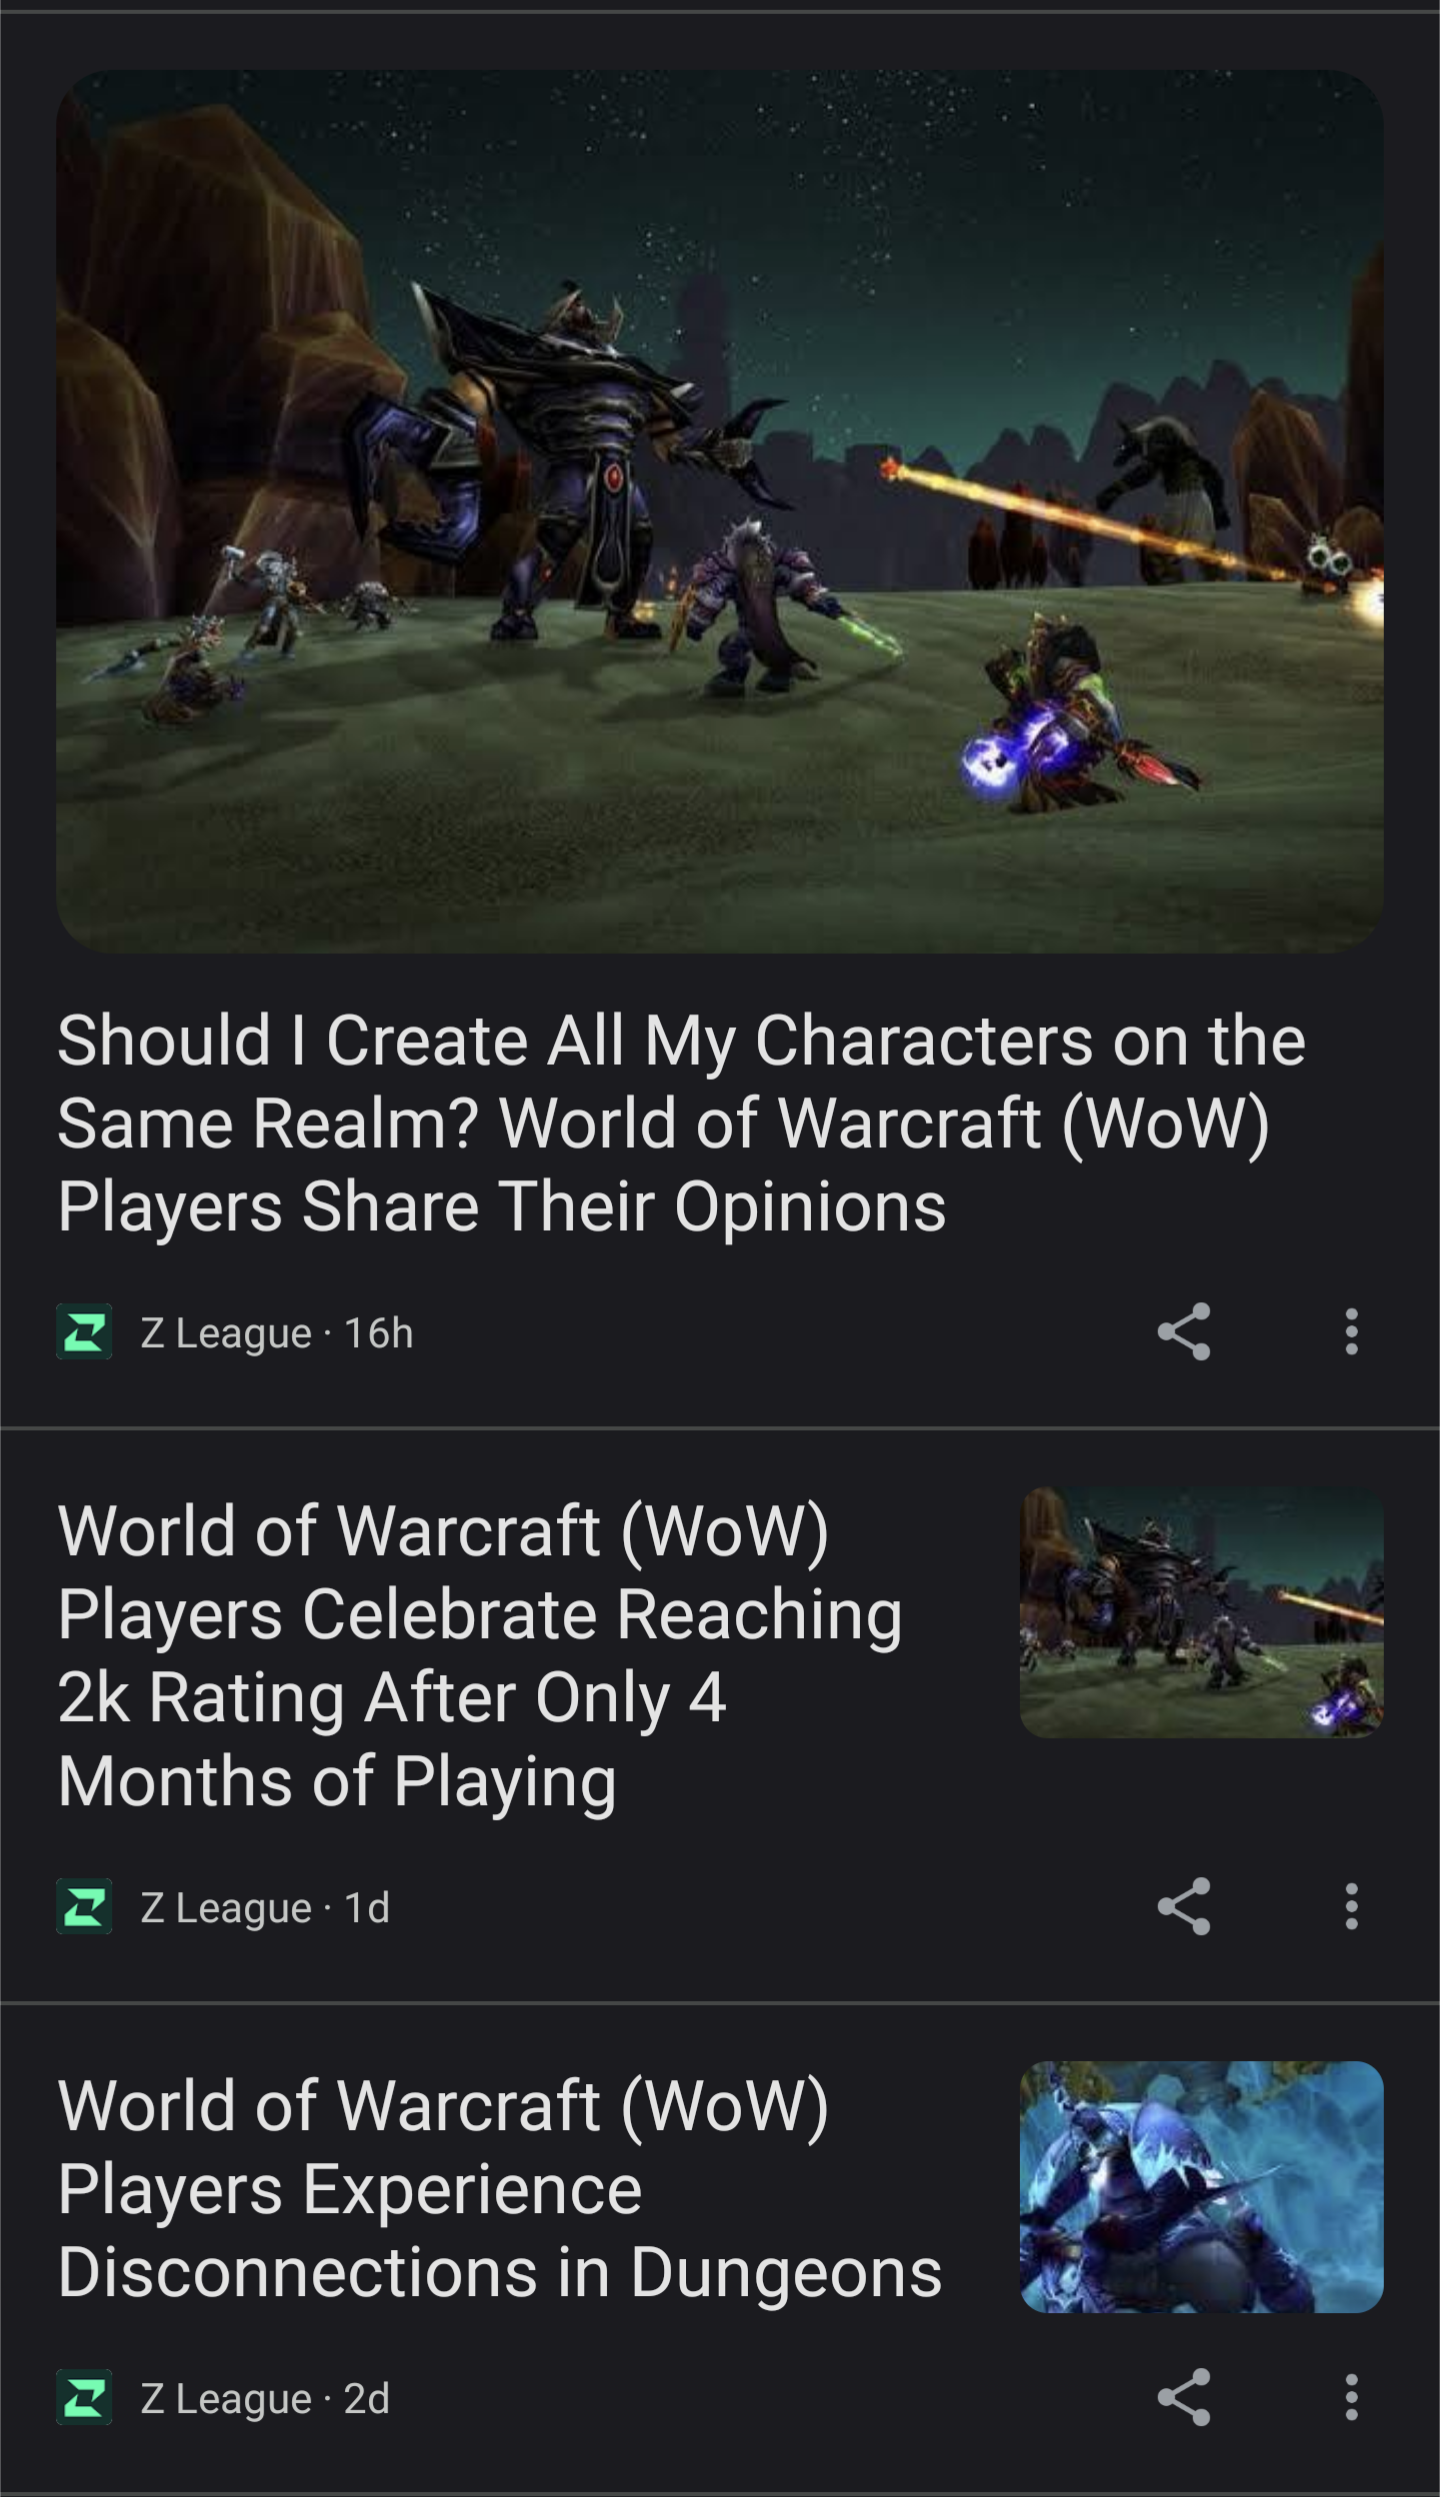 A screenshot of a Google feed showing multiple articles from a site called &quot;Z League&quot;. The articles discuss World of Warcraft and appear to be generated based on content from the World of Warcraft subreddit.